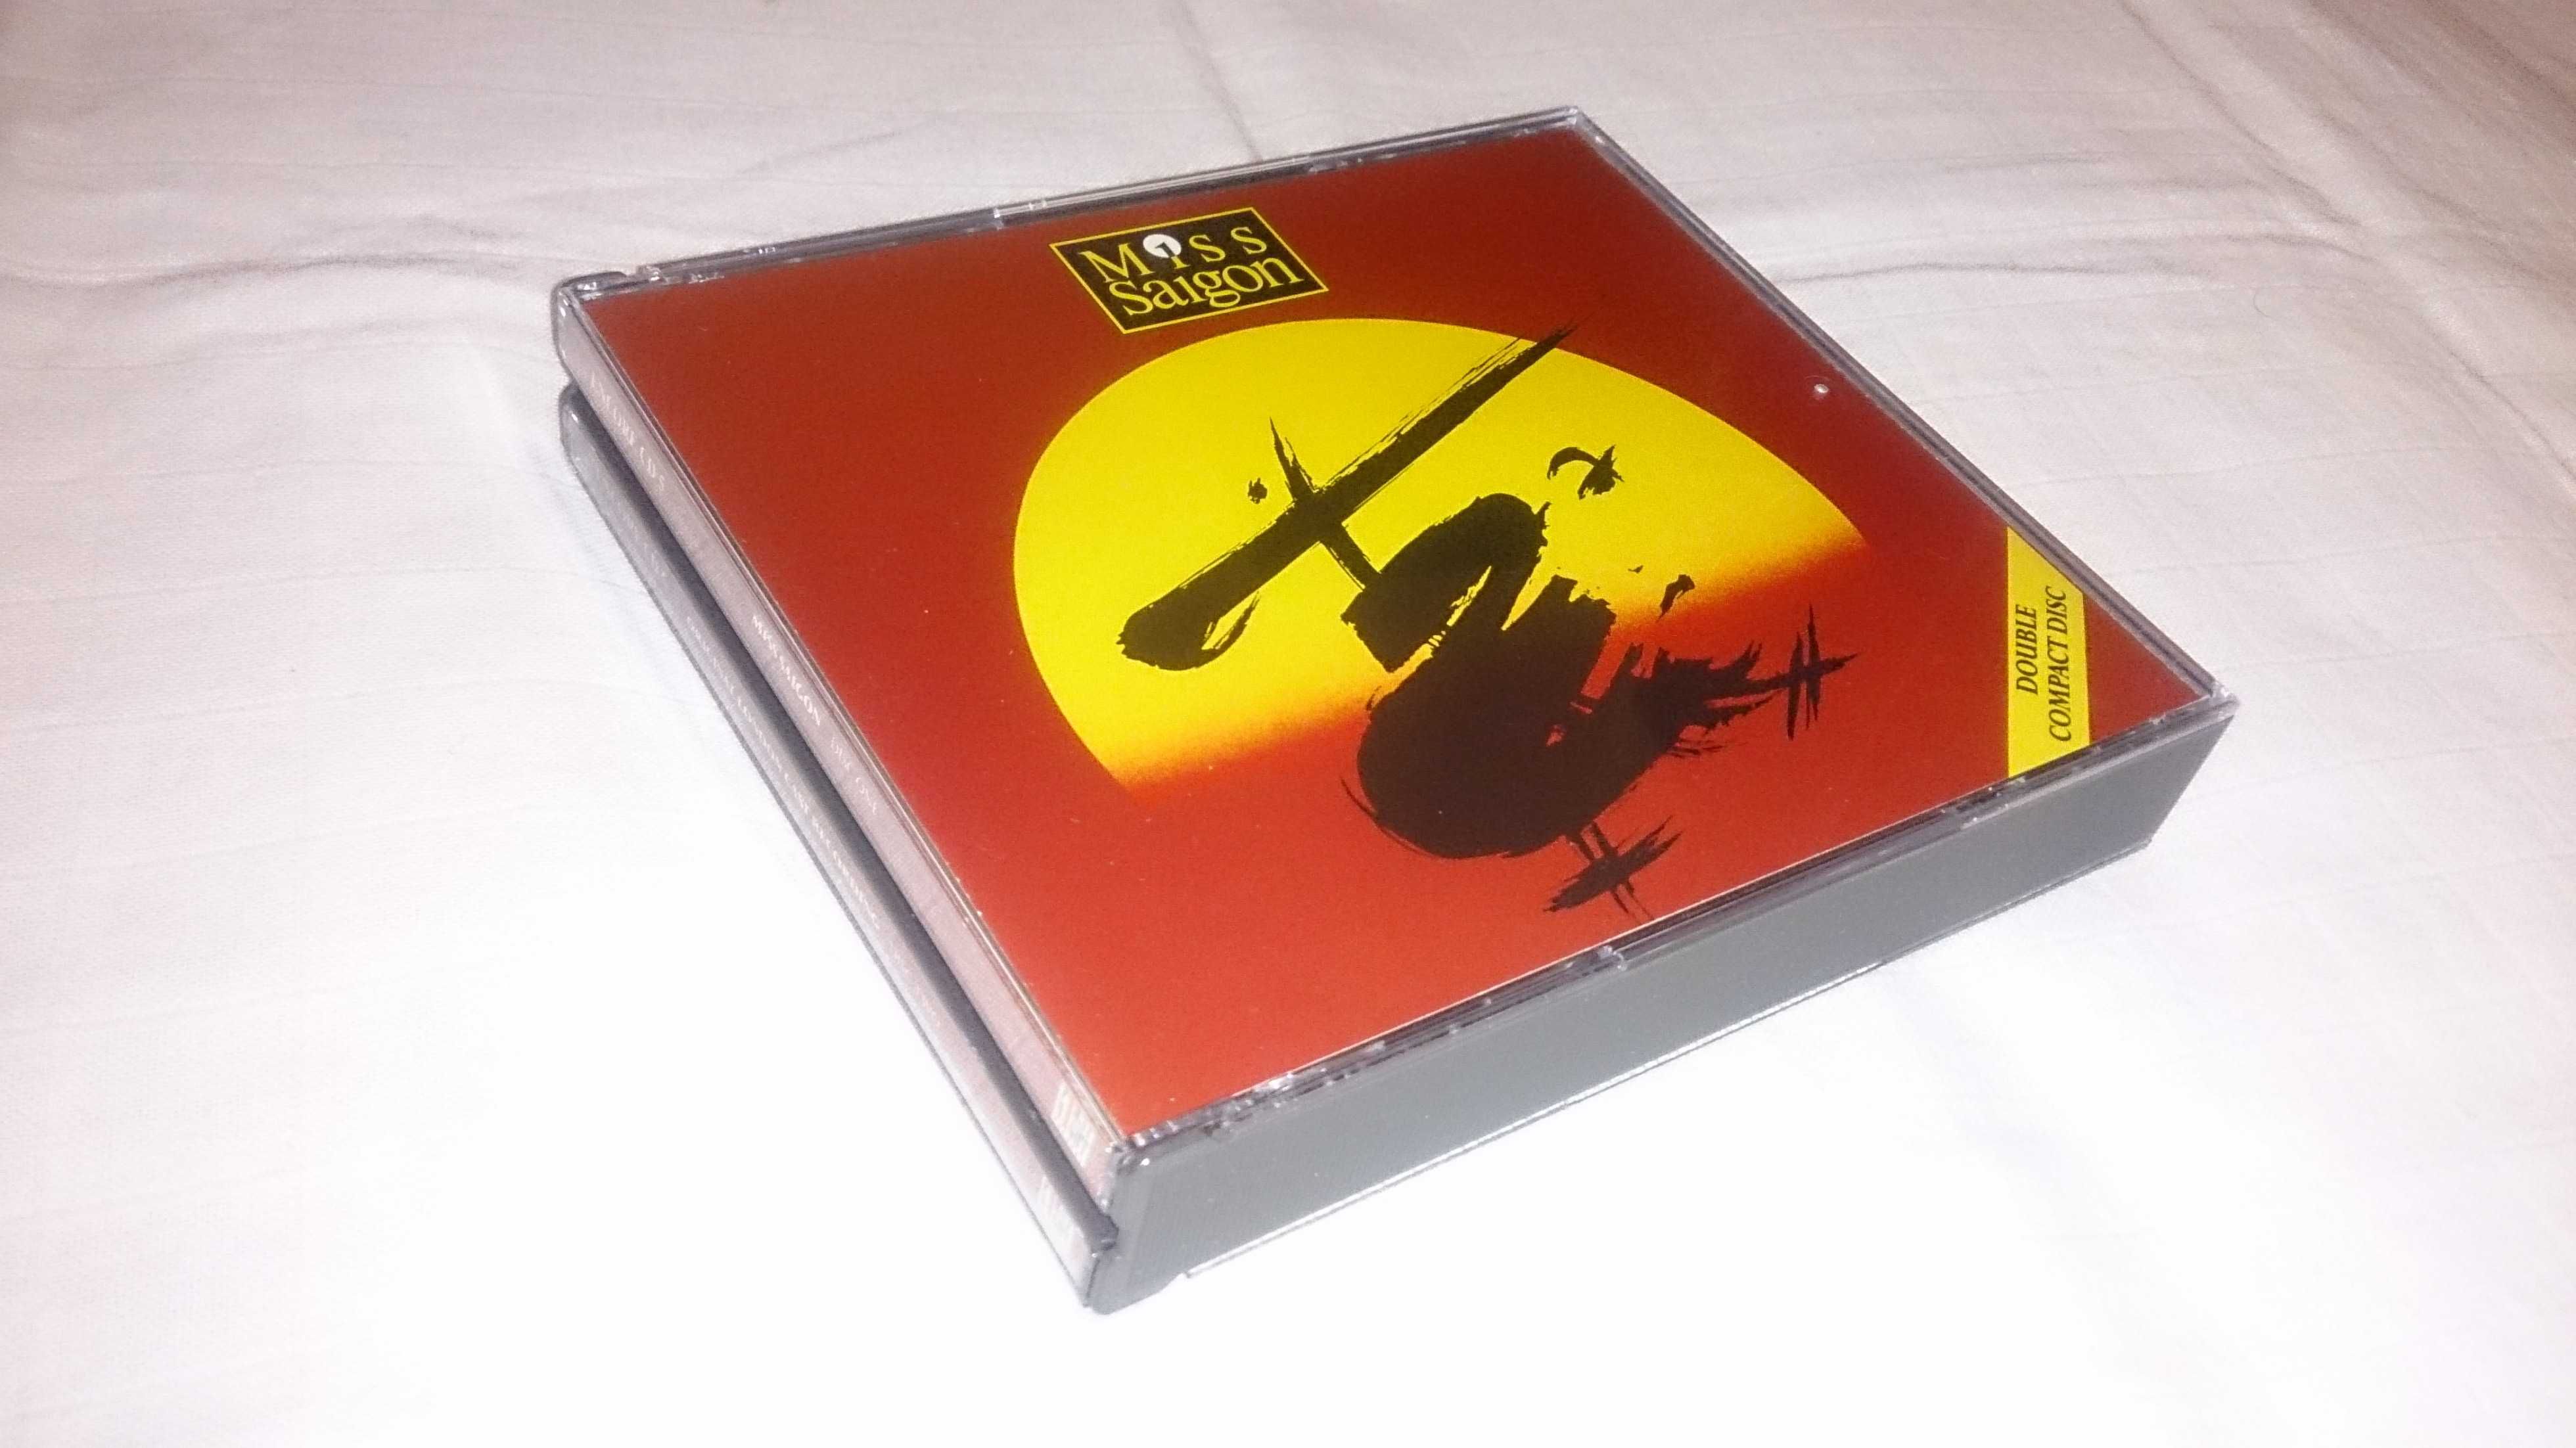 miss saigon (musical by alain boublil and claude-michel schonberg) 2CD